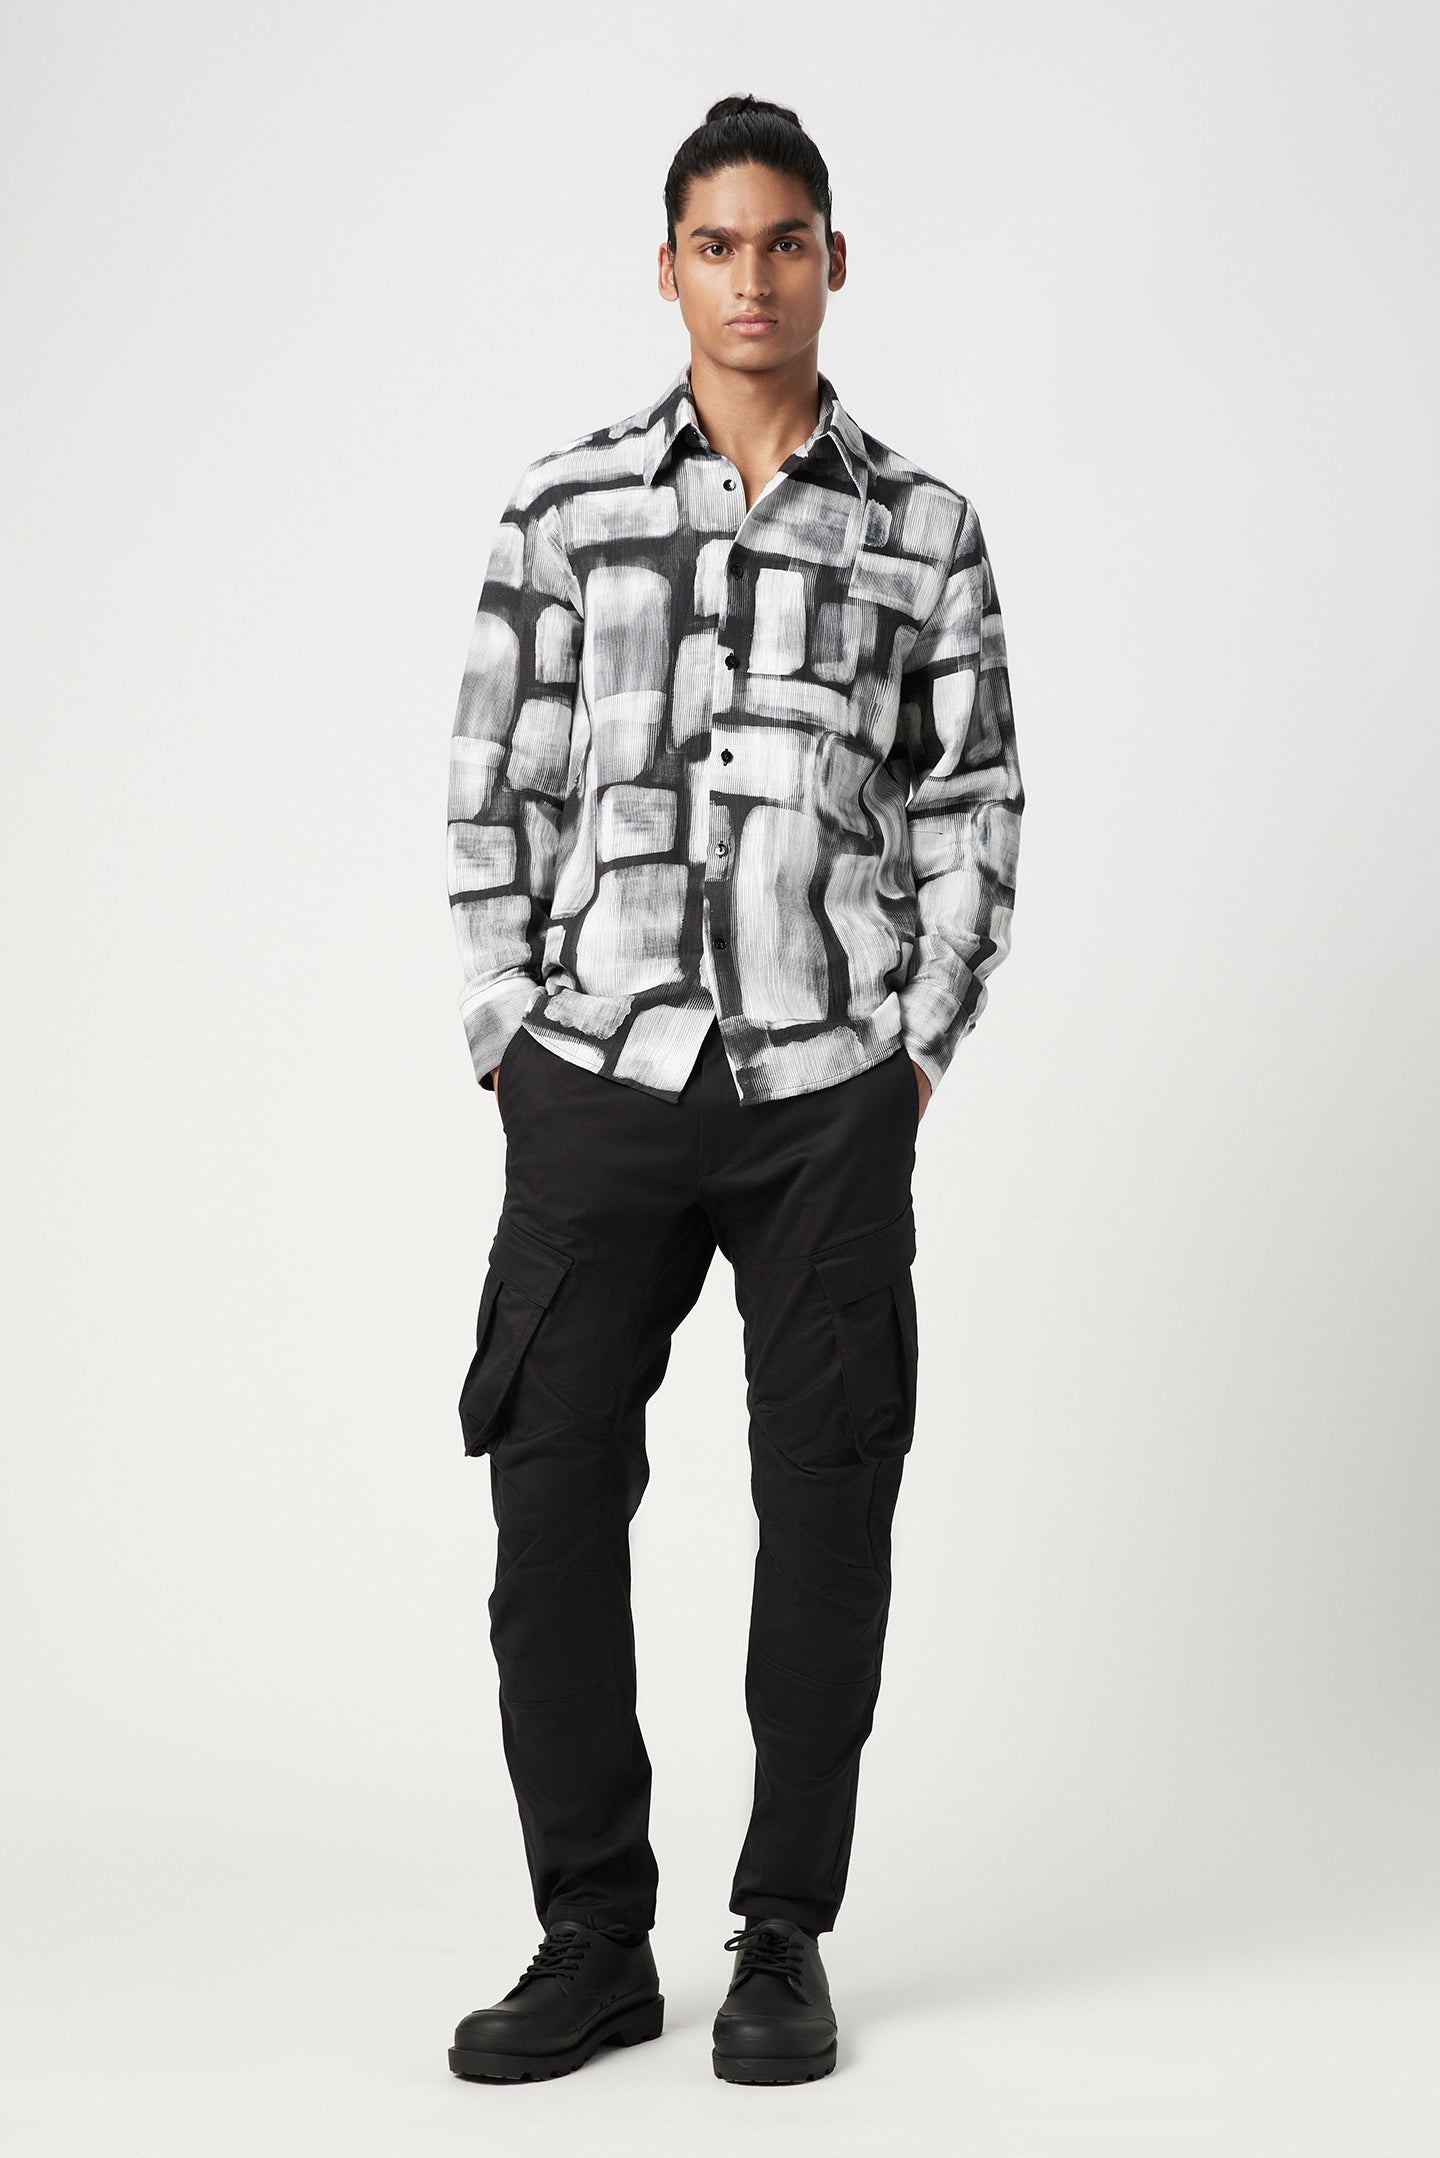 Easy Fit Button-Down Shirt in an All-Over Abstract Check Print